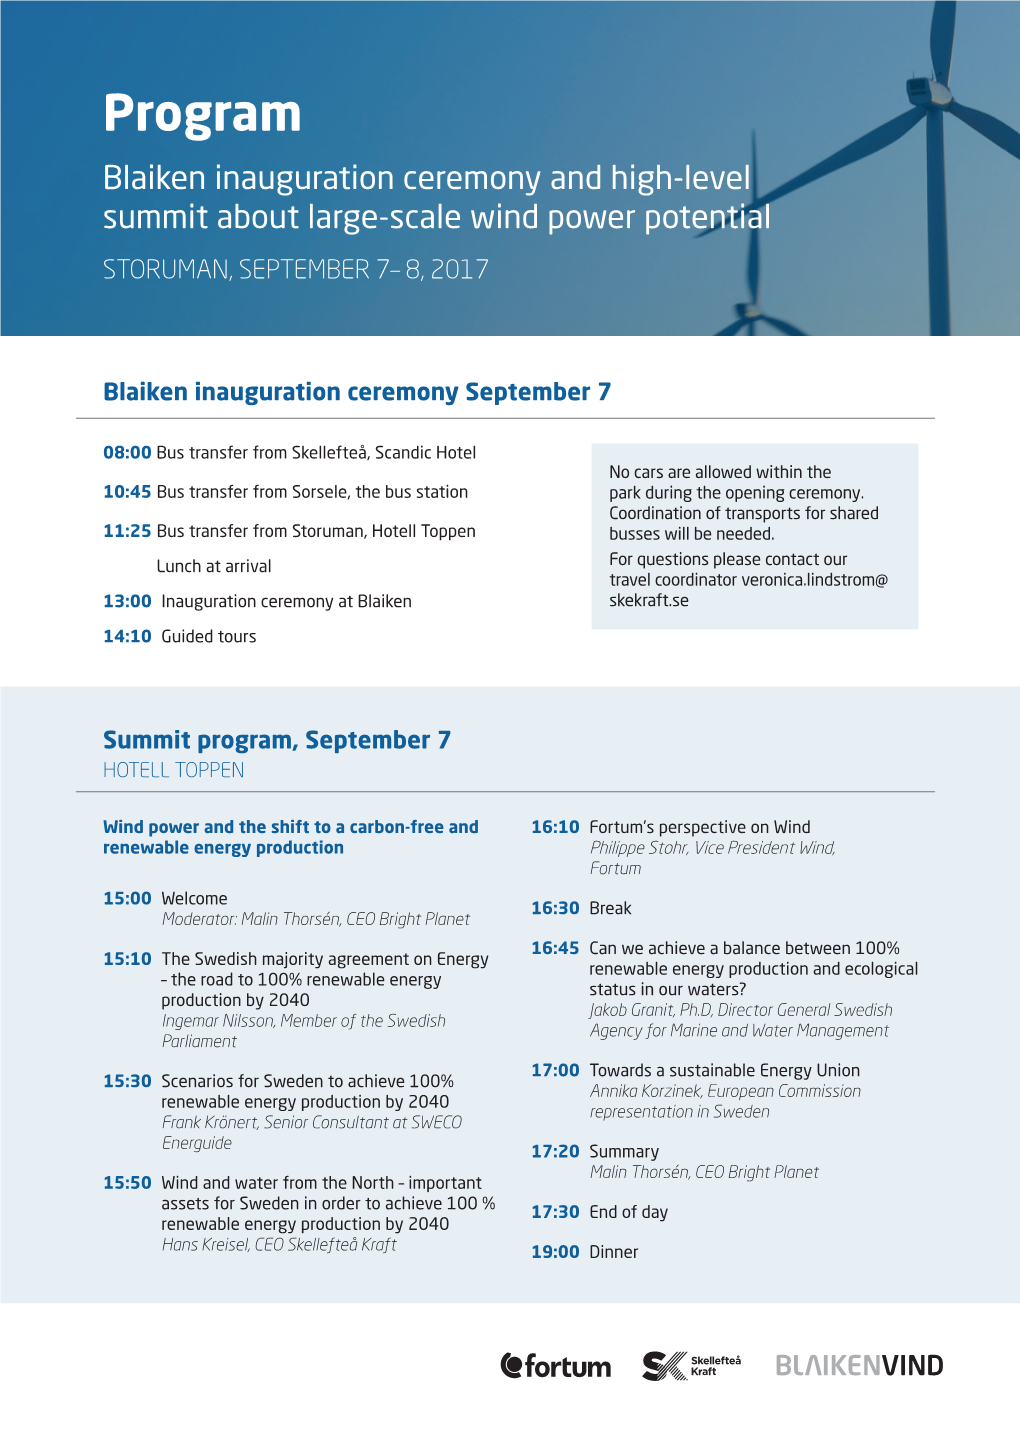 Program Blaiken Inauguration Ceremony and High-Level Summit About Large-Scale Wind Power Potential STORUMAN, SEPTEMBER 7– 8, 2017